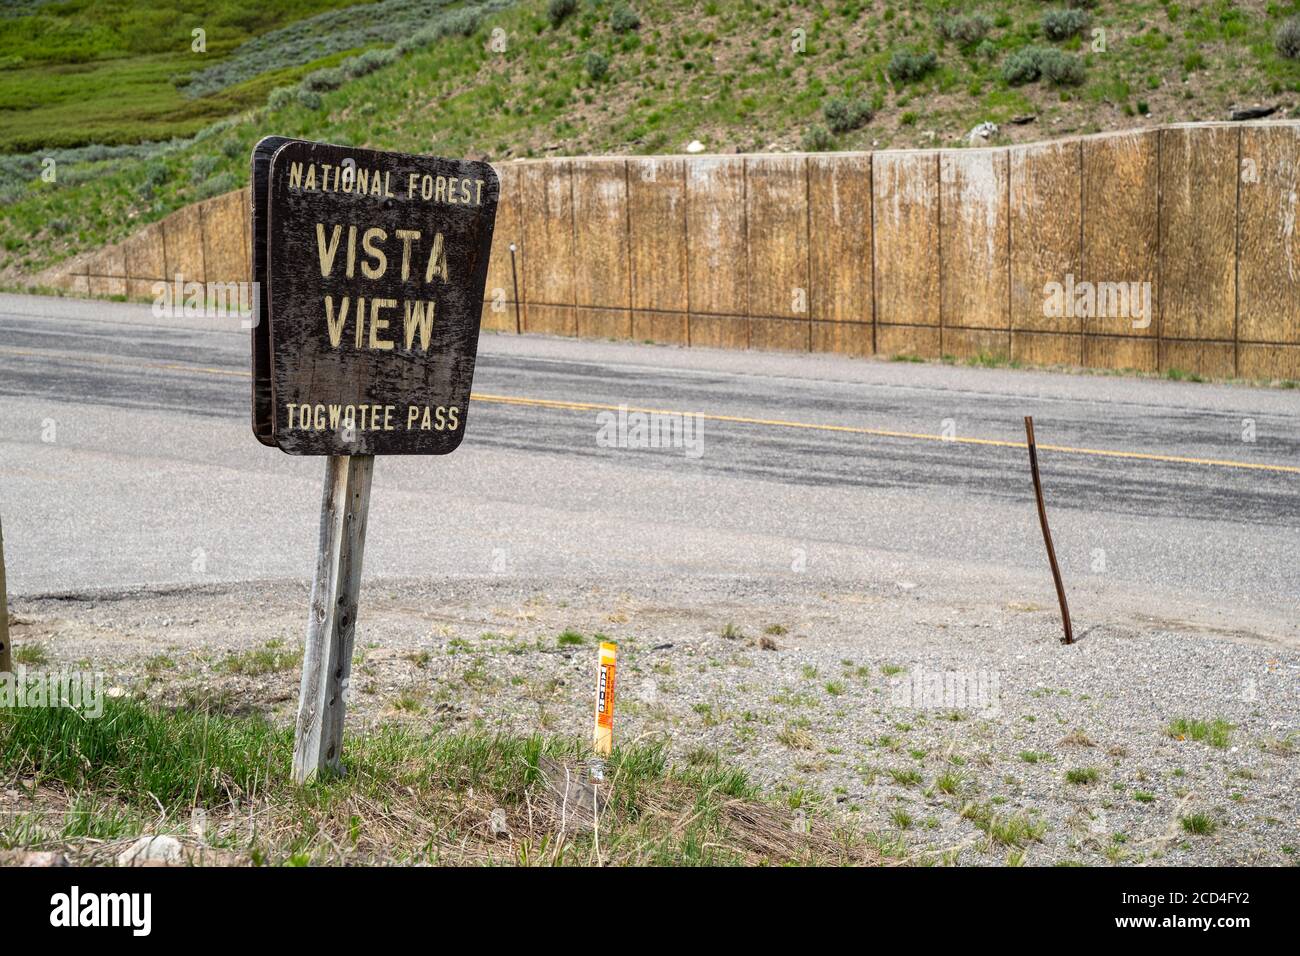 Sign for National Forest Vista View - Togwotee Pass Stock Photo